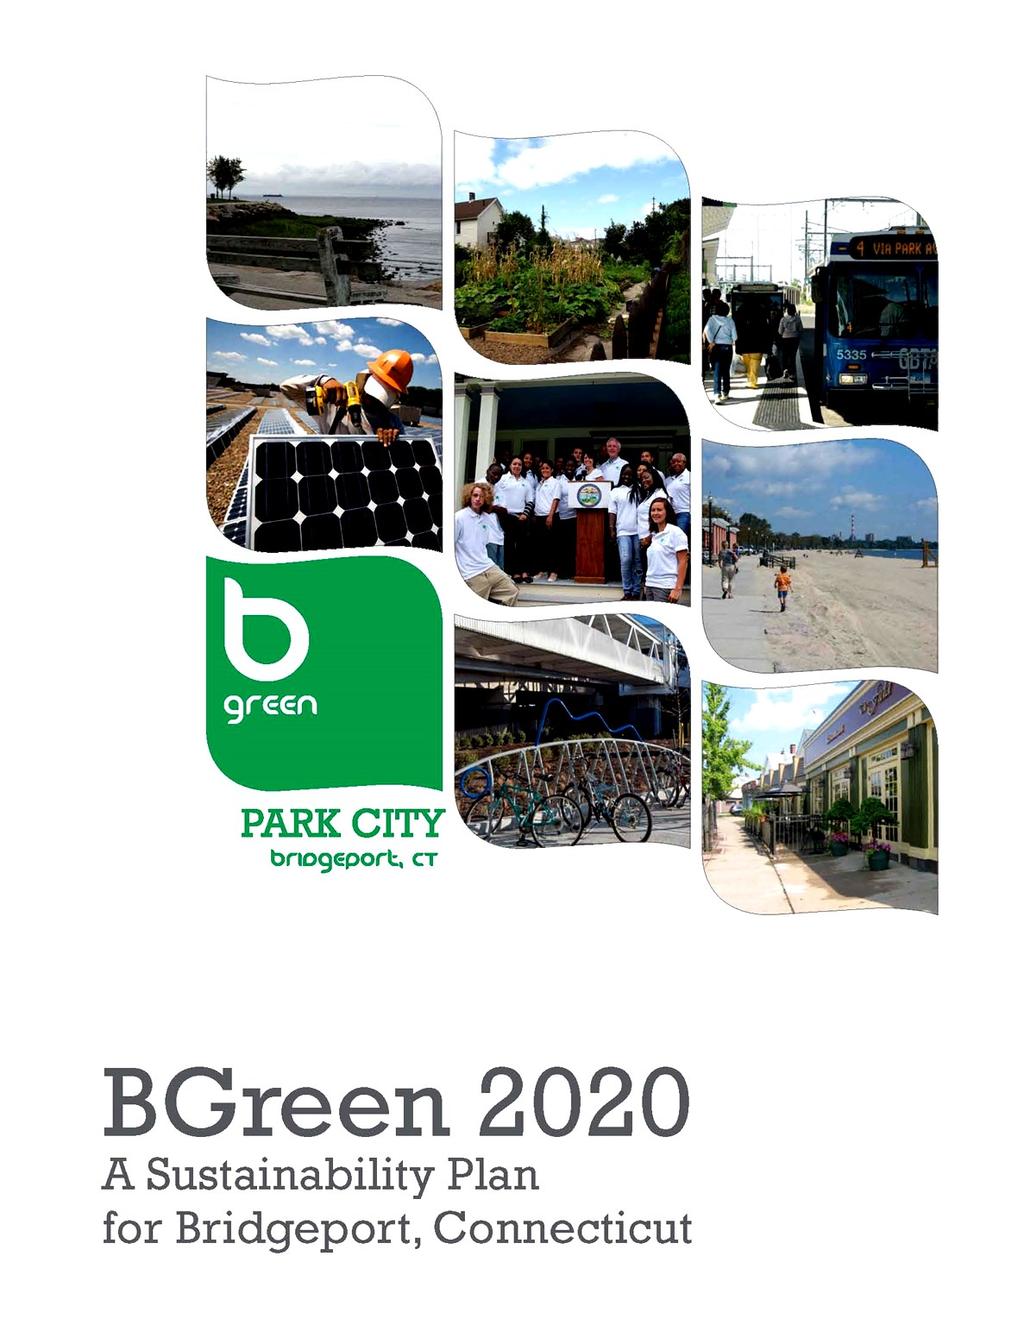 BGreen 2020 Land Use / Transportation Energy Recycling Business, Jobs & Purchasing Green